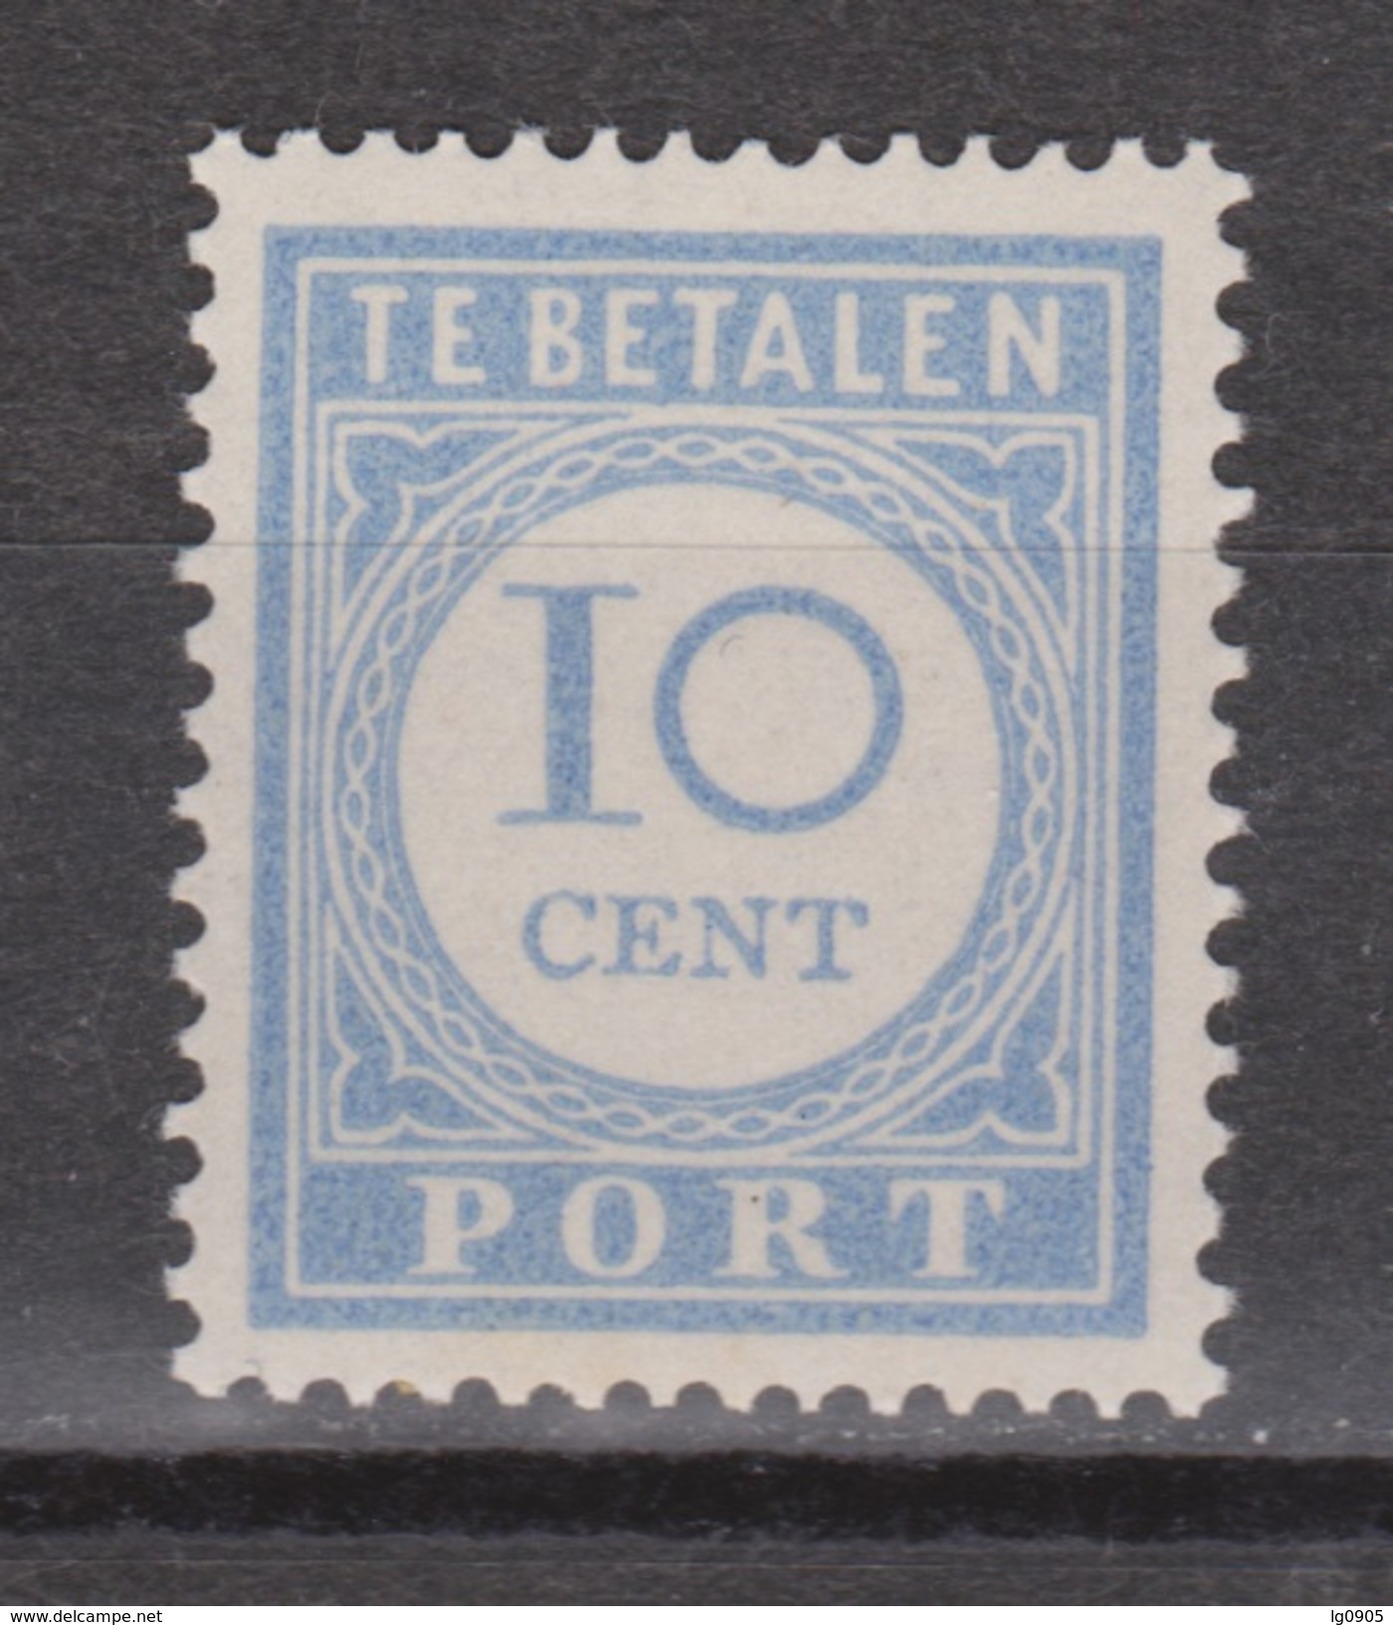 NVPH Nederland Netherlands Holanda Pays Bas Port 55 MLH Timbre-taxe Postmarke Sellos De Correos NOW MANY DUE STAMPS - Postage Due